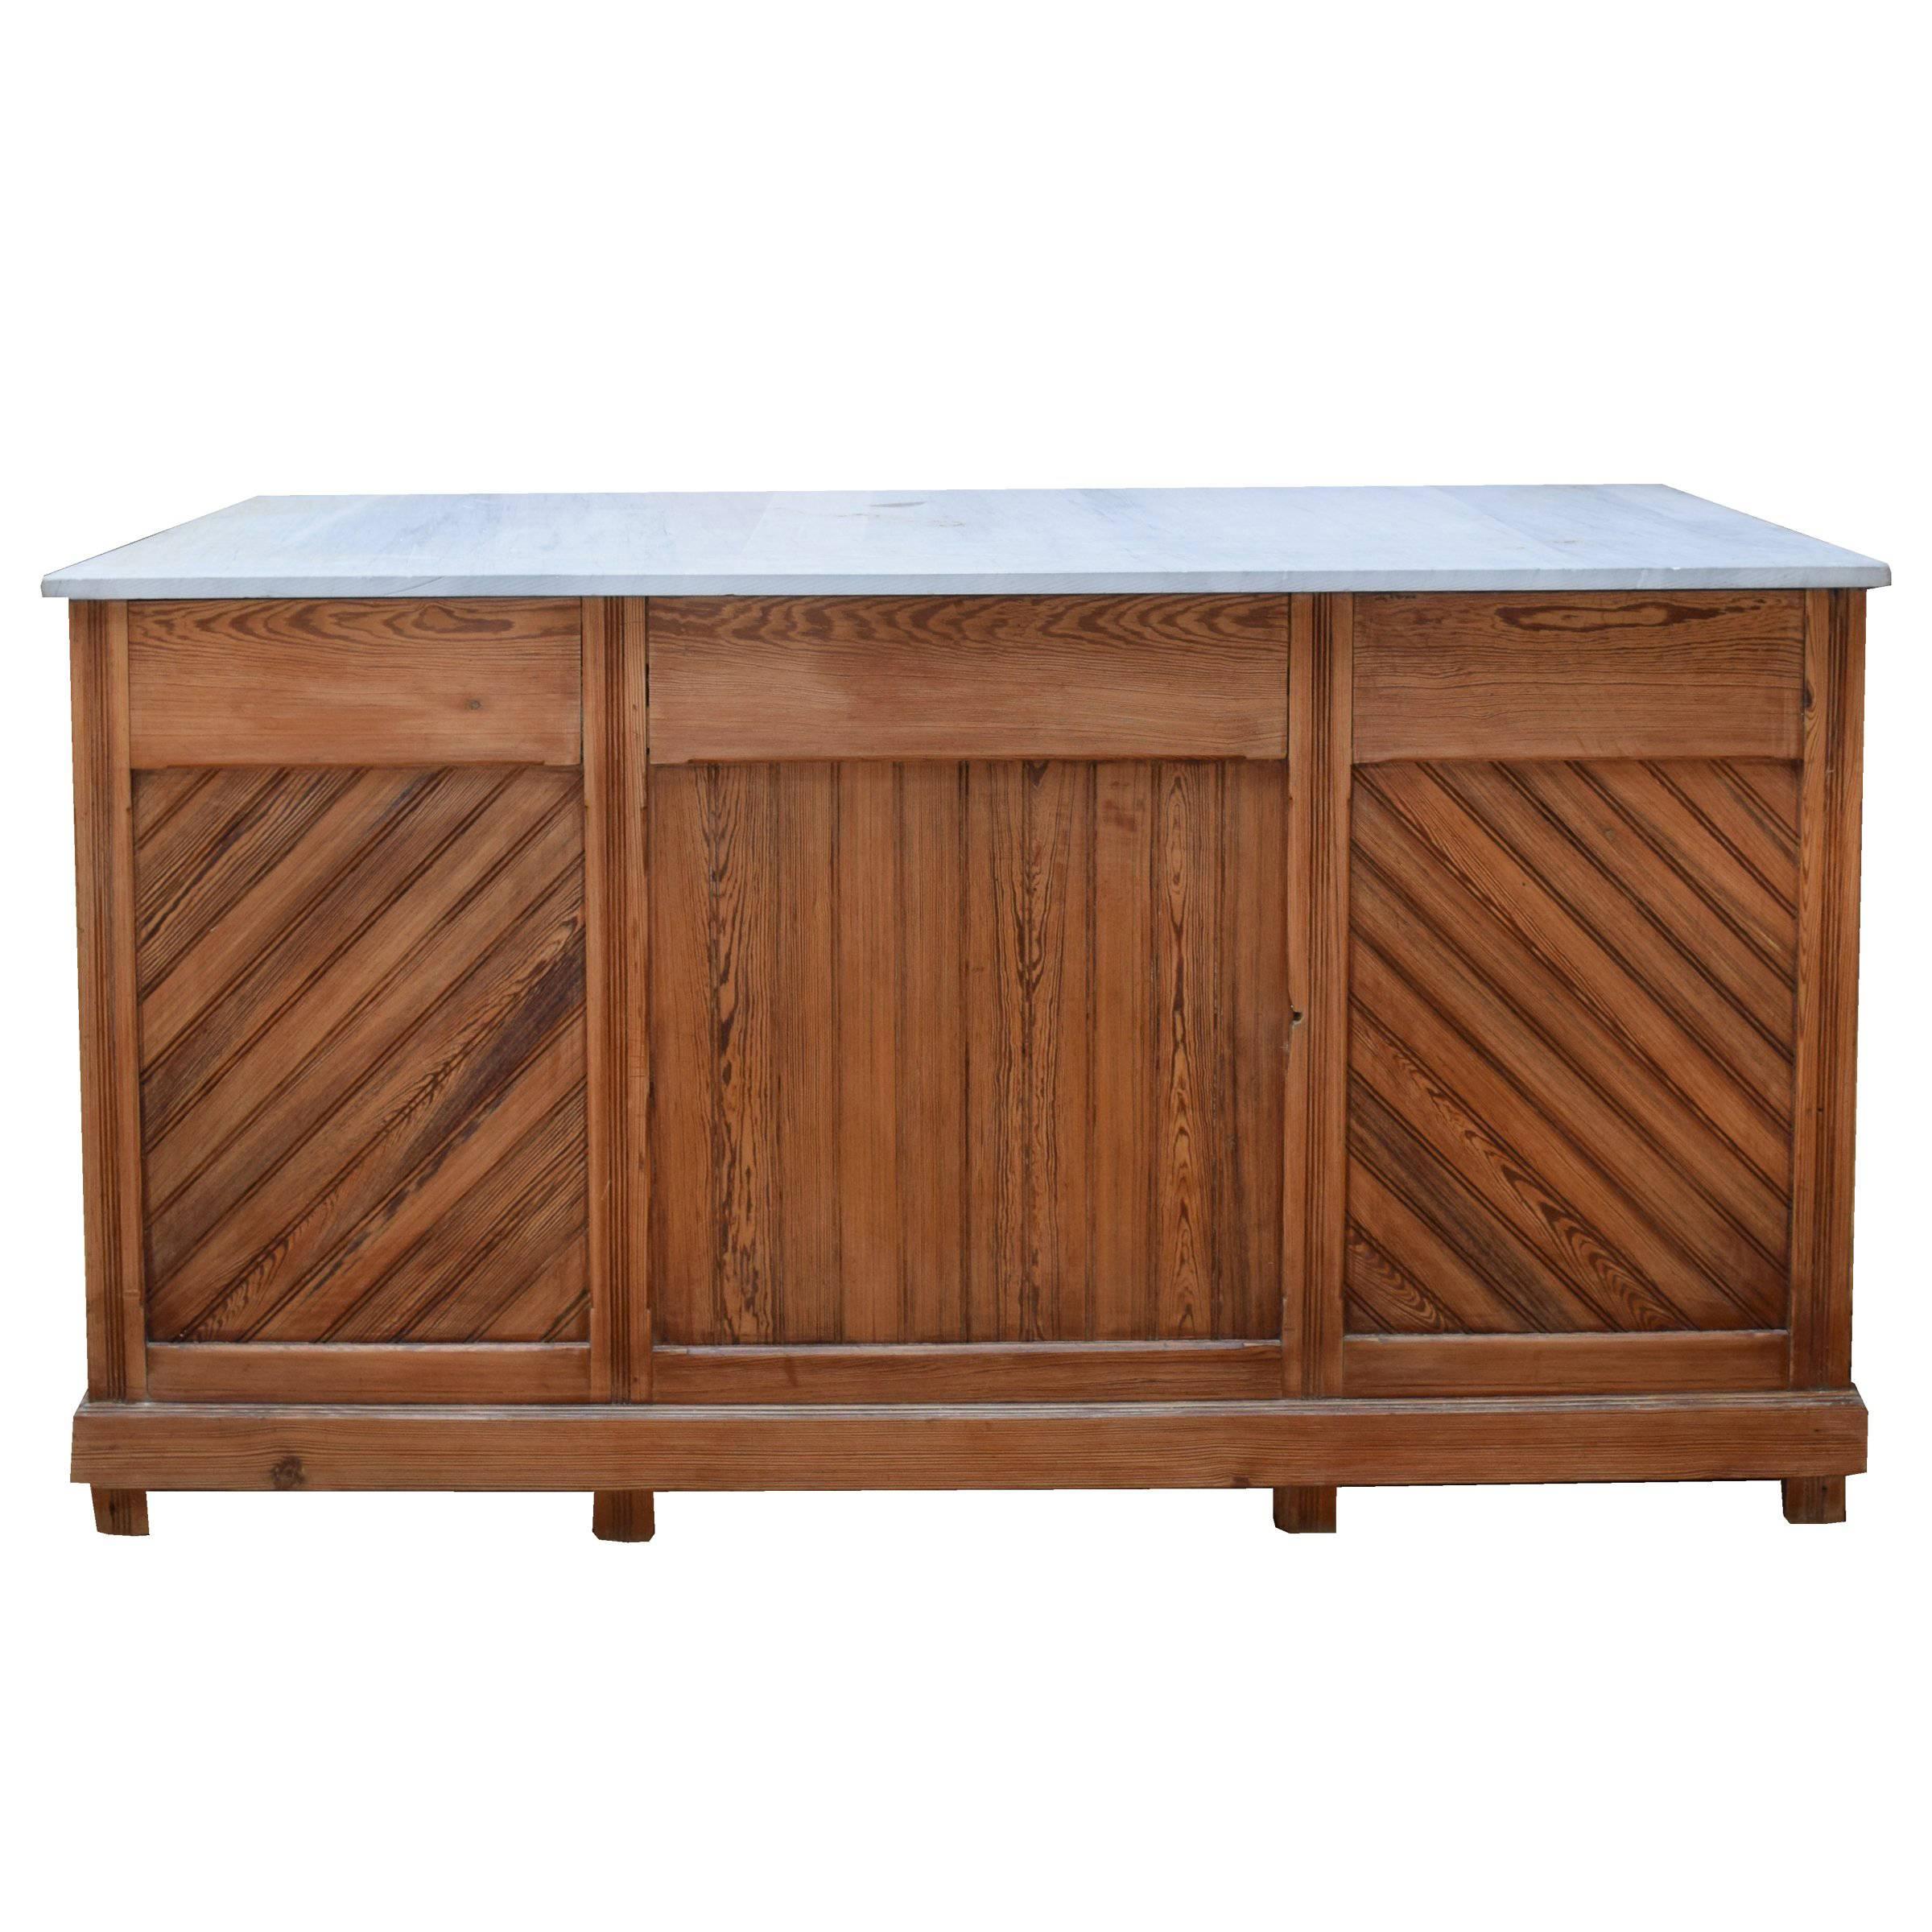 Early 20th Century, French Pine Bakery Counter